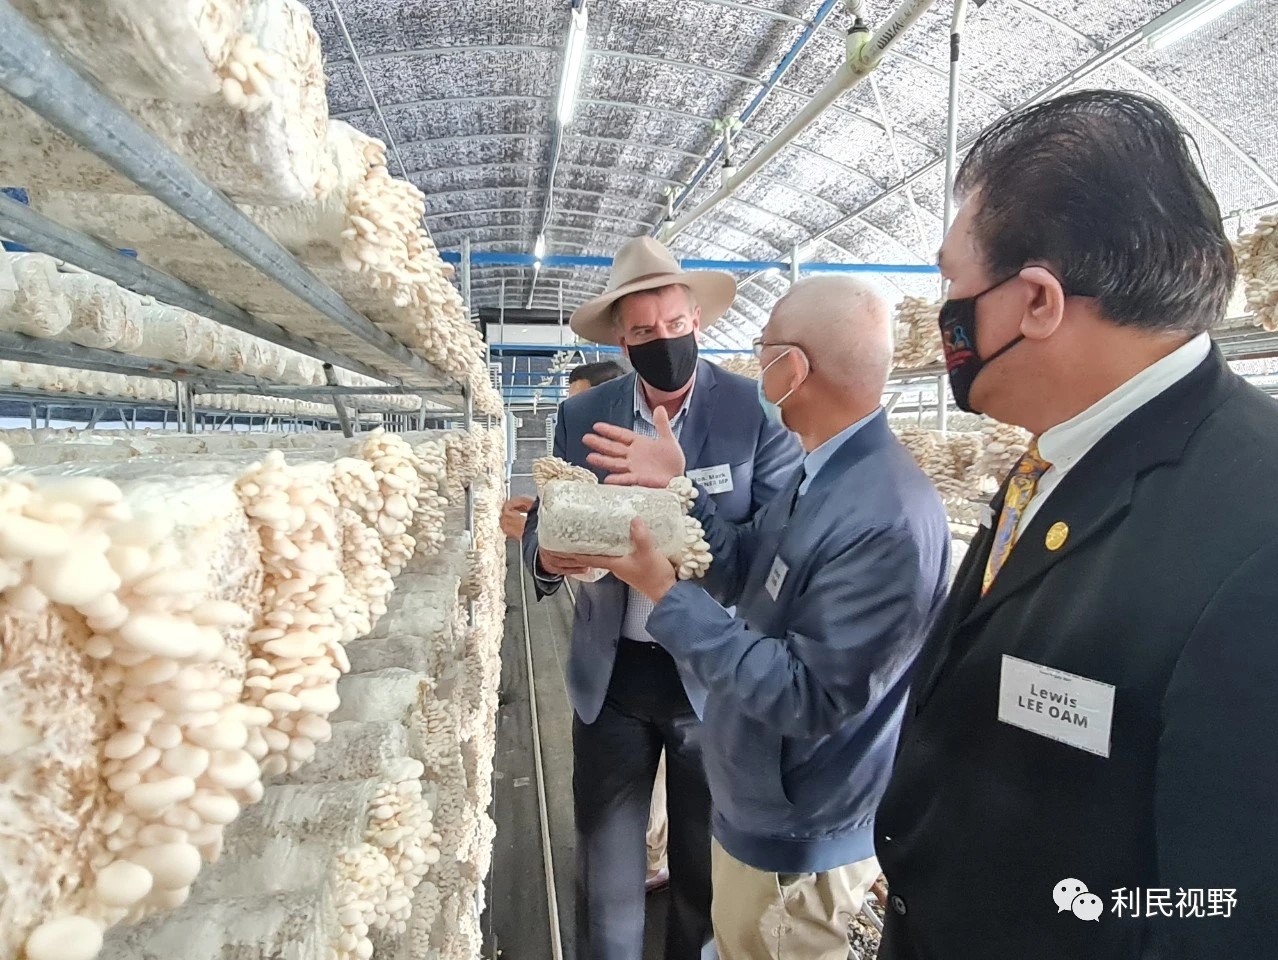 In September, Future Food Systems welcomed Sunshine-Coast-based sustainable exotic mushroom grower Kenon Corporation into its consortium.